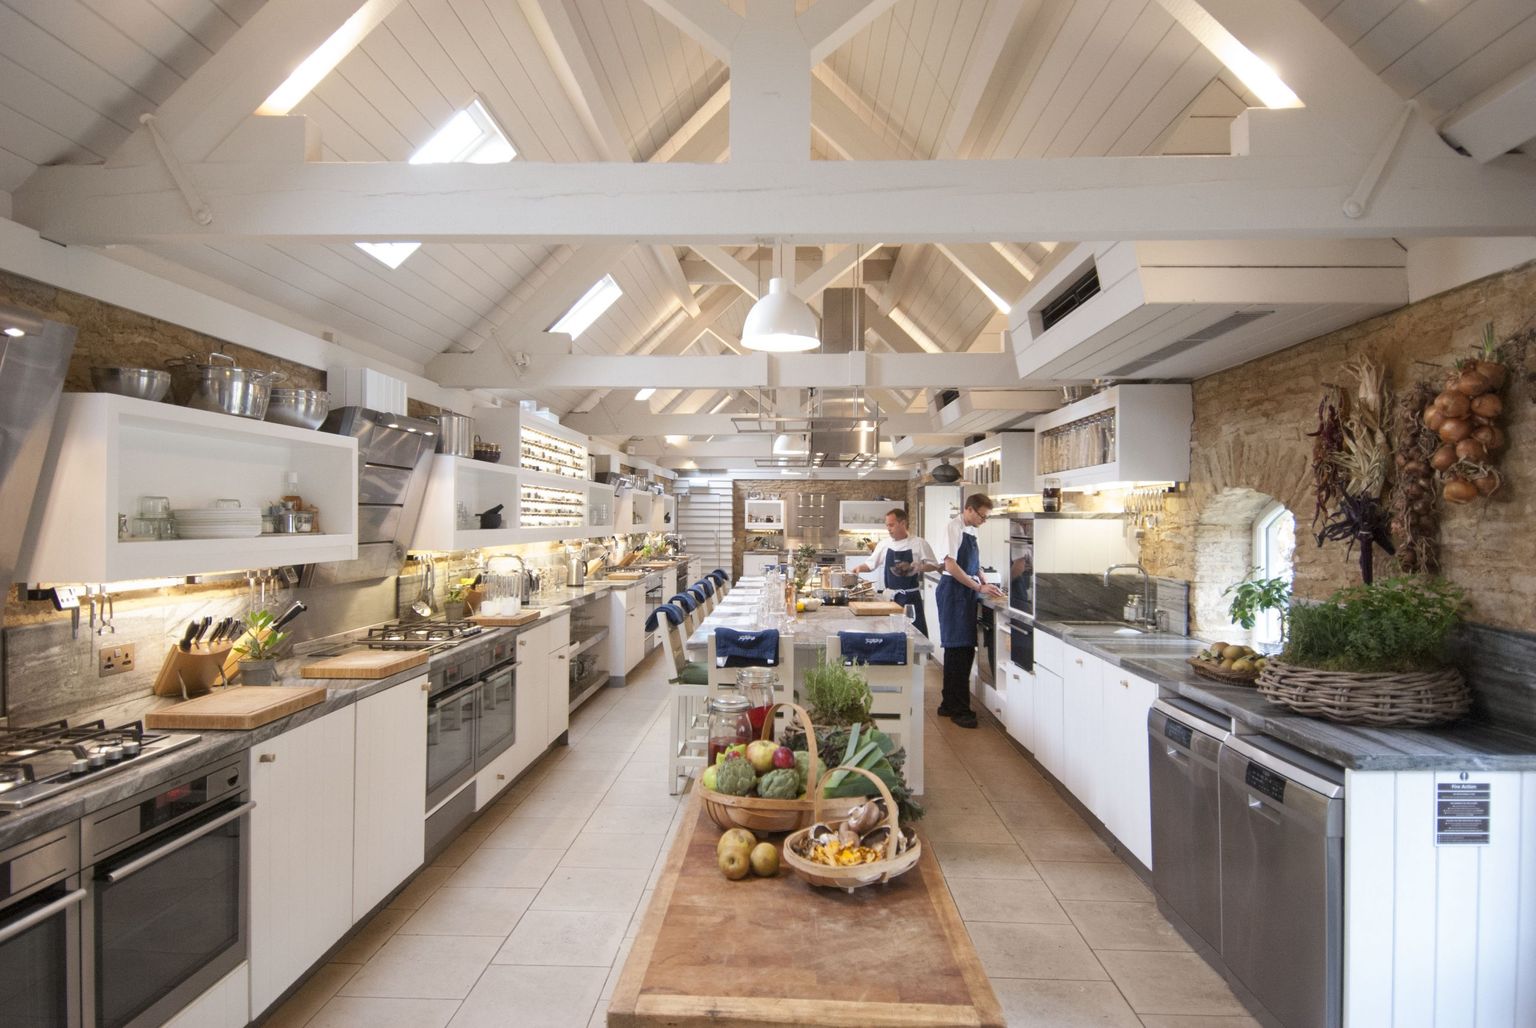 Daylesford Cookery School | Summer 2020 Courses